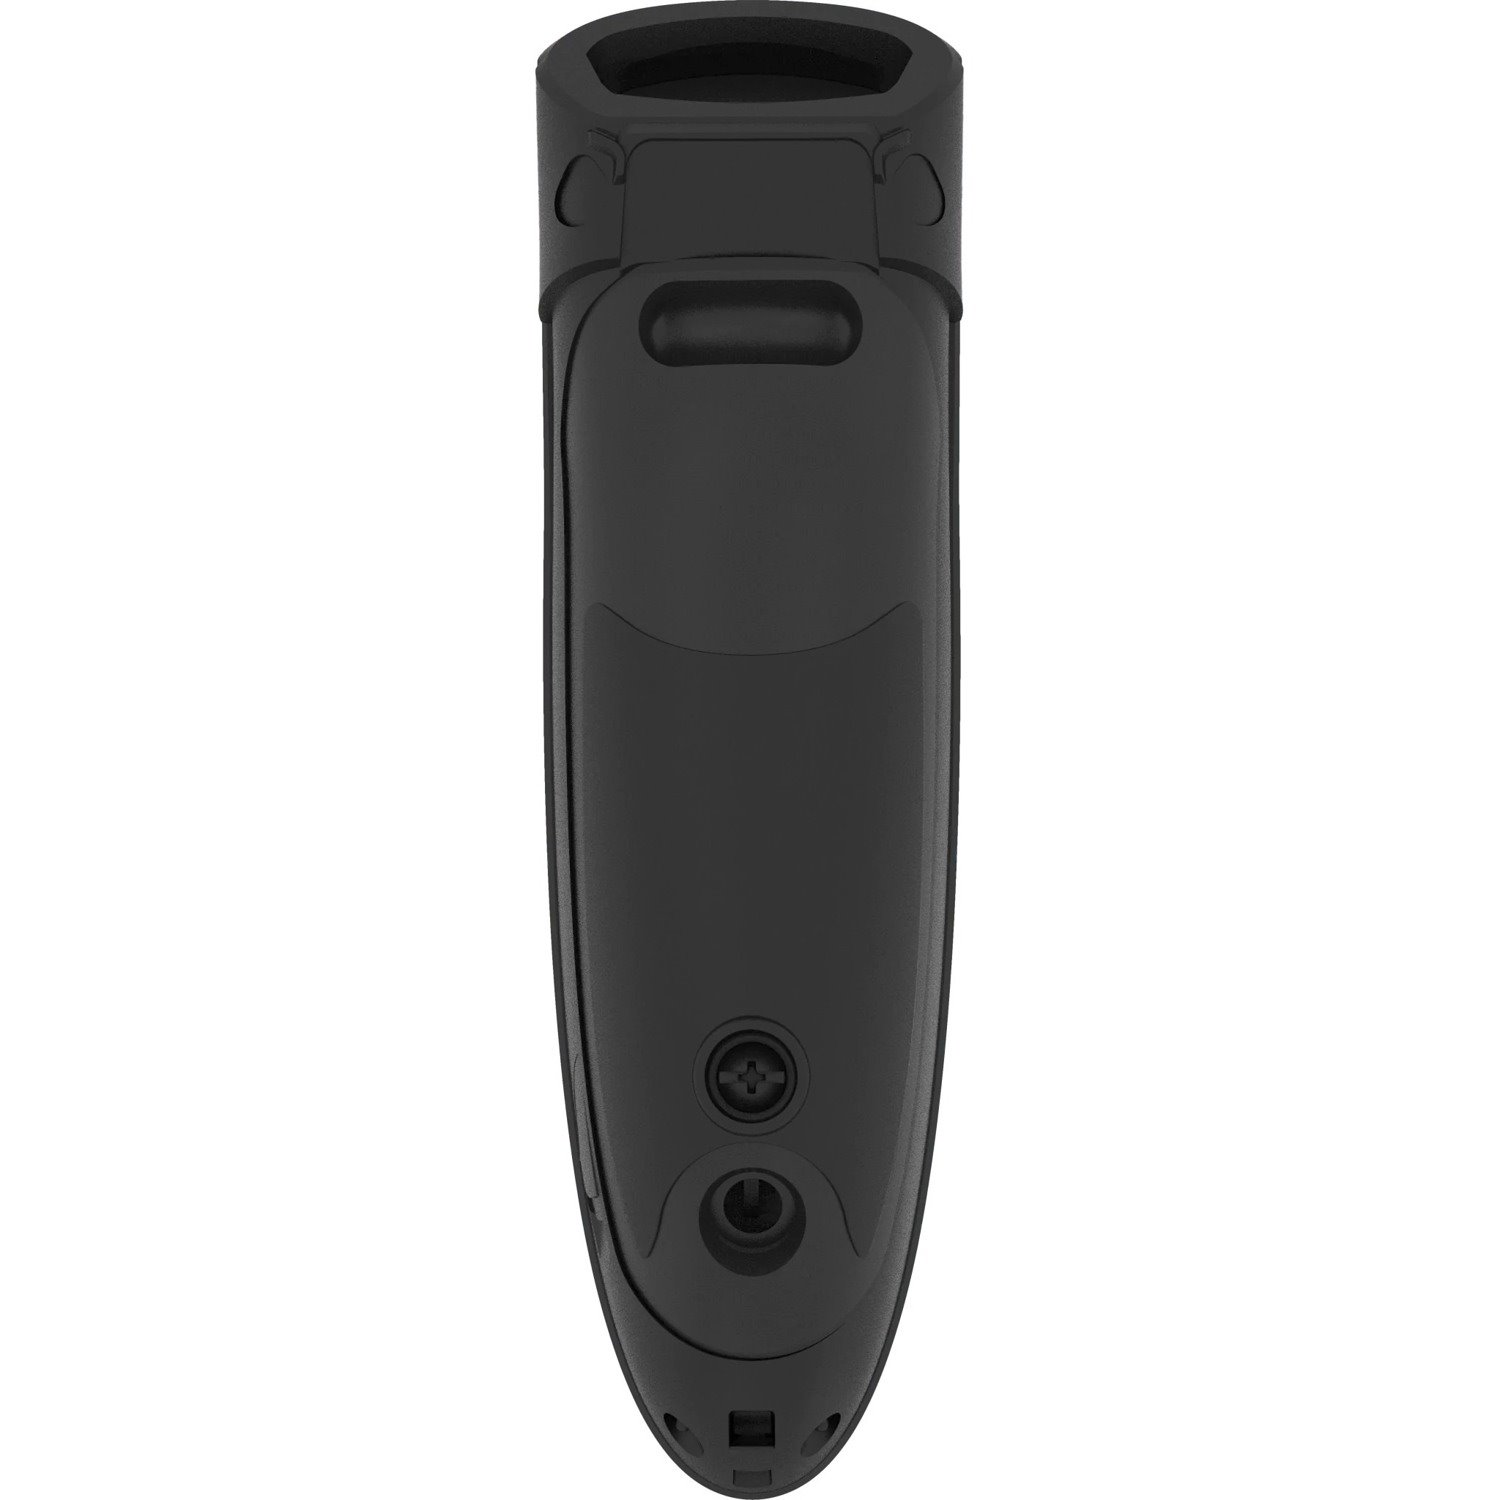 Socket Mobile DuraScan D720 Rugged Retail, Transportation, Warehouse, Manufacturing, Field Sales/Service, Healthcare, Asset Tracking Handheld Barcode Scanner - Wireless Connectivity - Grey - USB Cable Included